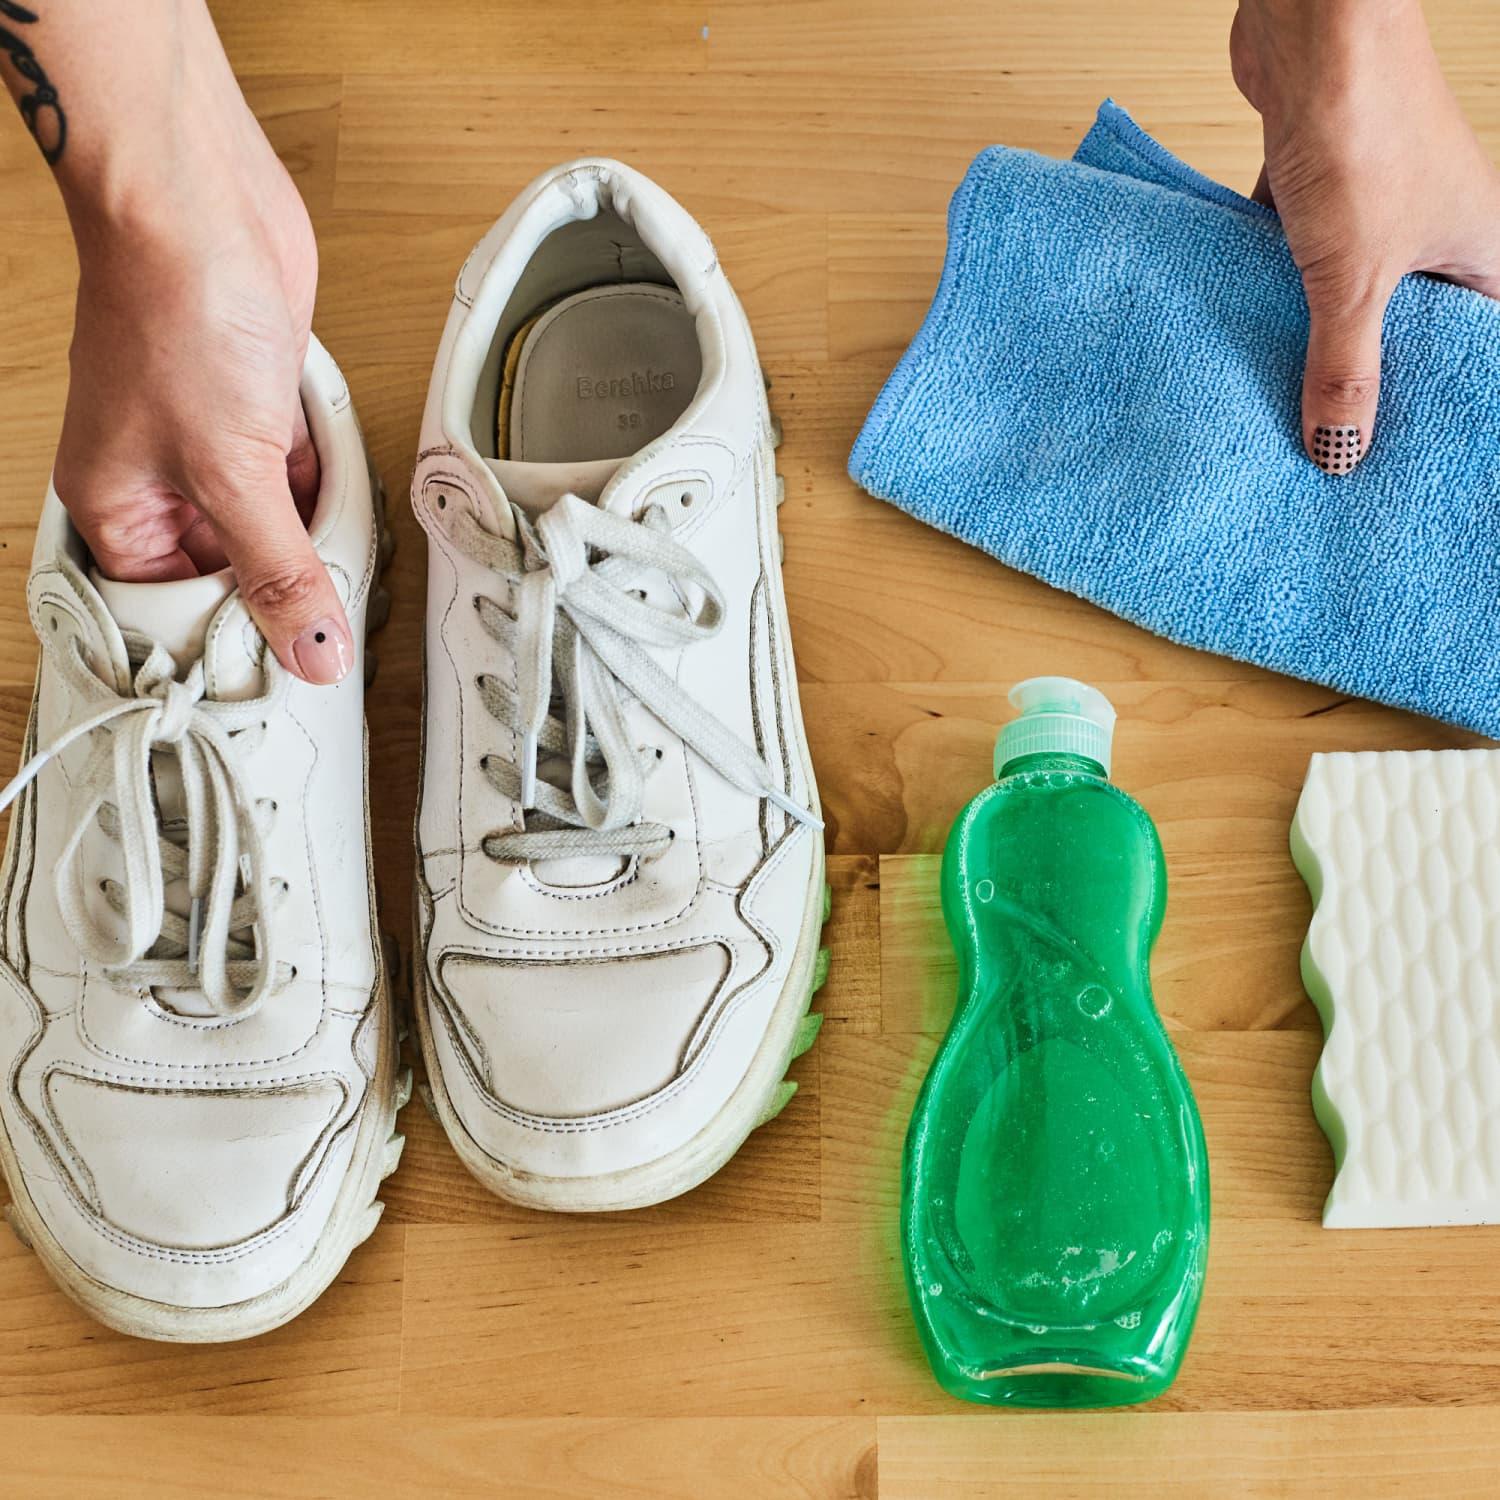 How to clean canvas shoes